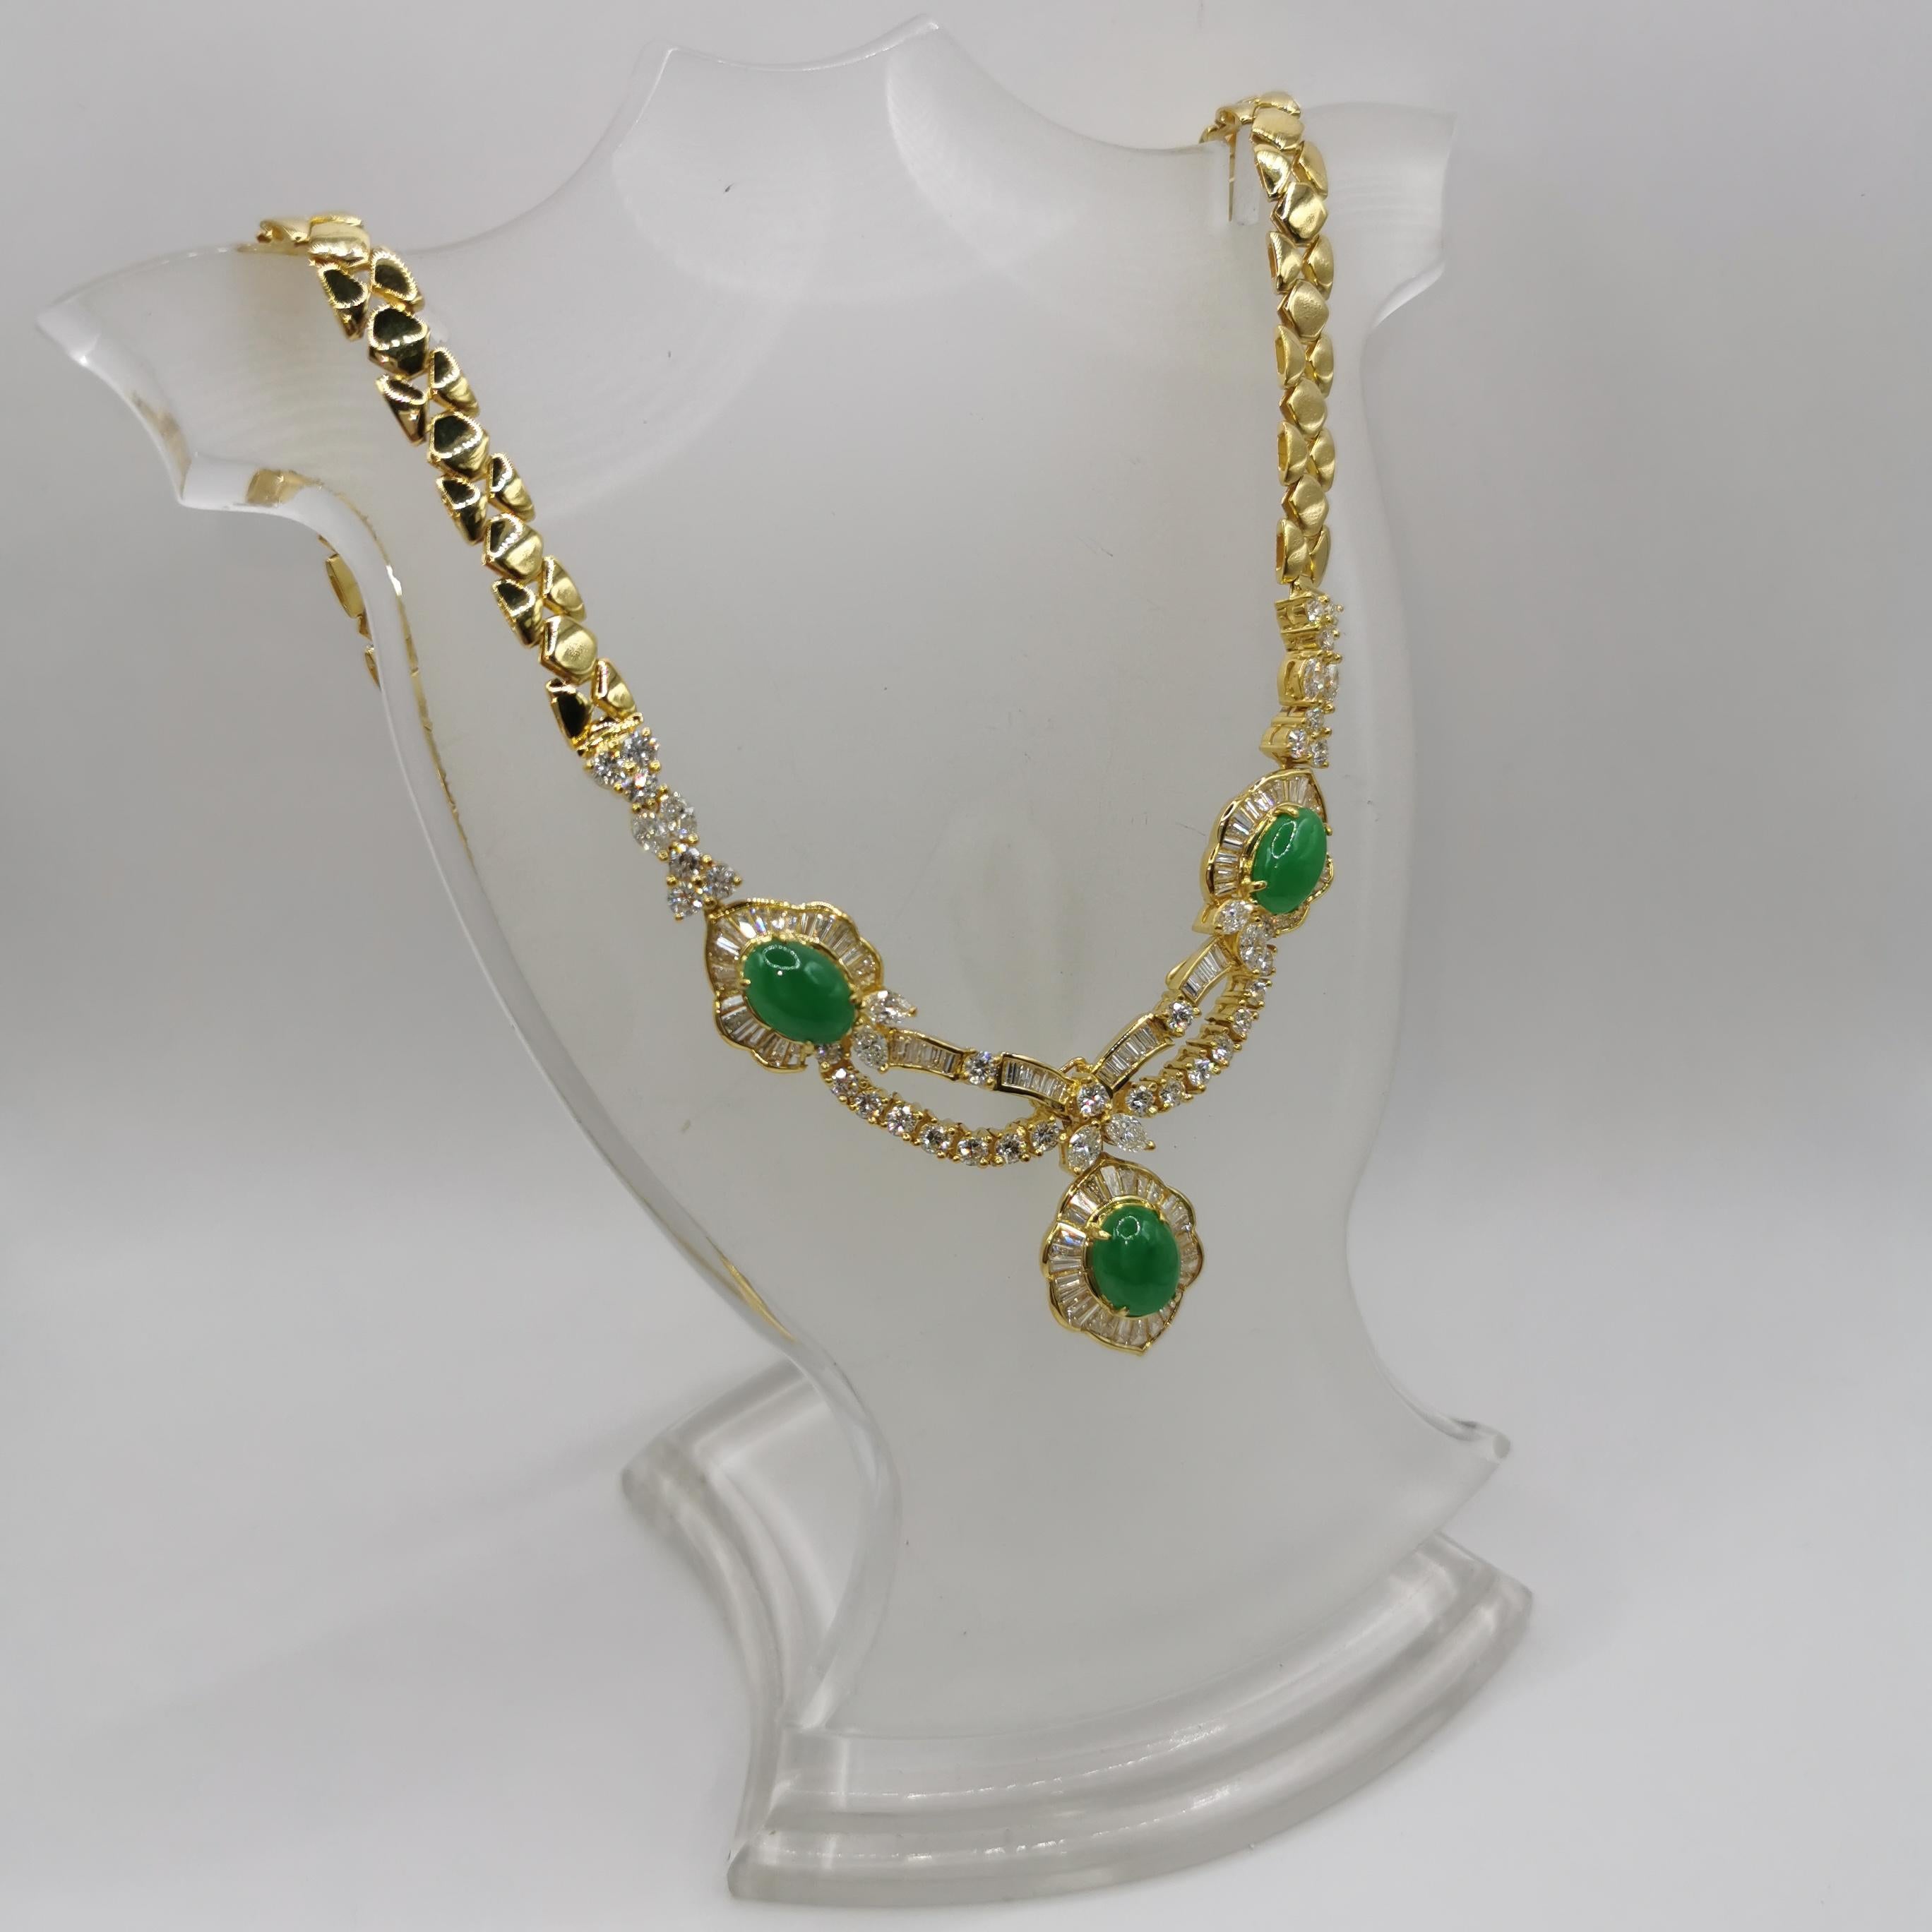 This one-of-a-kind extraordinarily unique vintage Green Jadite Diamond Yellow Gold Necklace is set with three beautiful translucent apple green cabochon jadeites at the center. Each jade is surrounded by paves of tapered baguette cut diamonds,